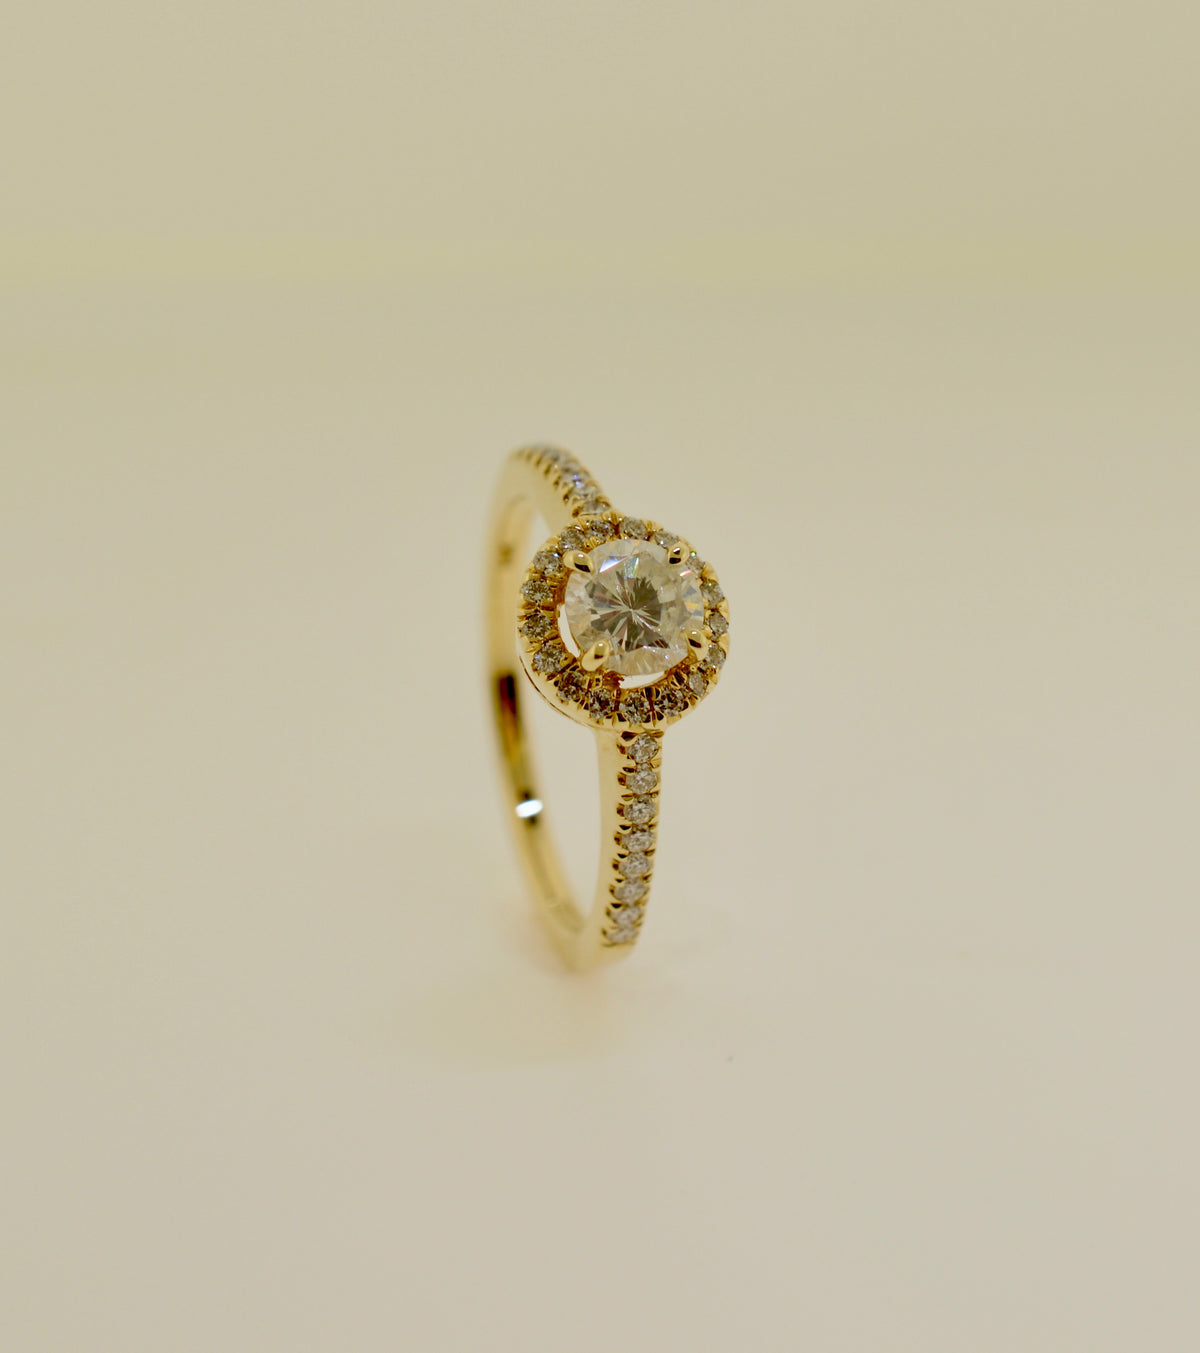 14K Yellow Gold Round Brilliant Cut Diamond Engagement Ring with Halo